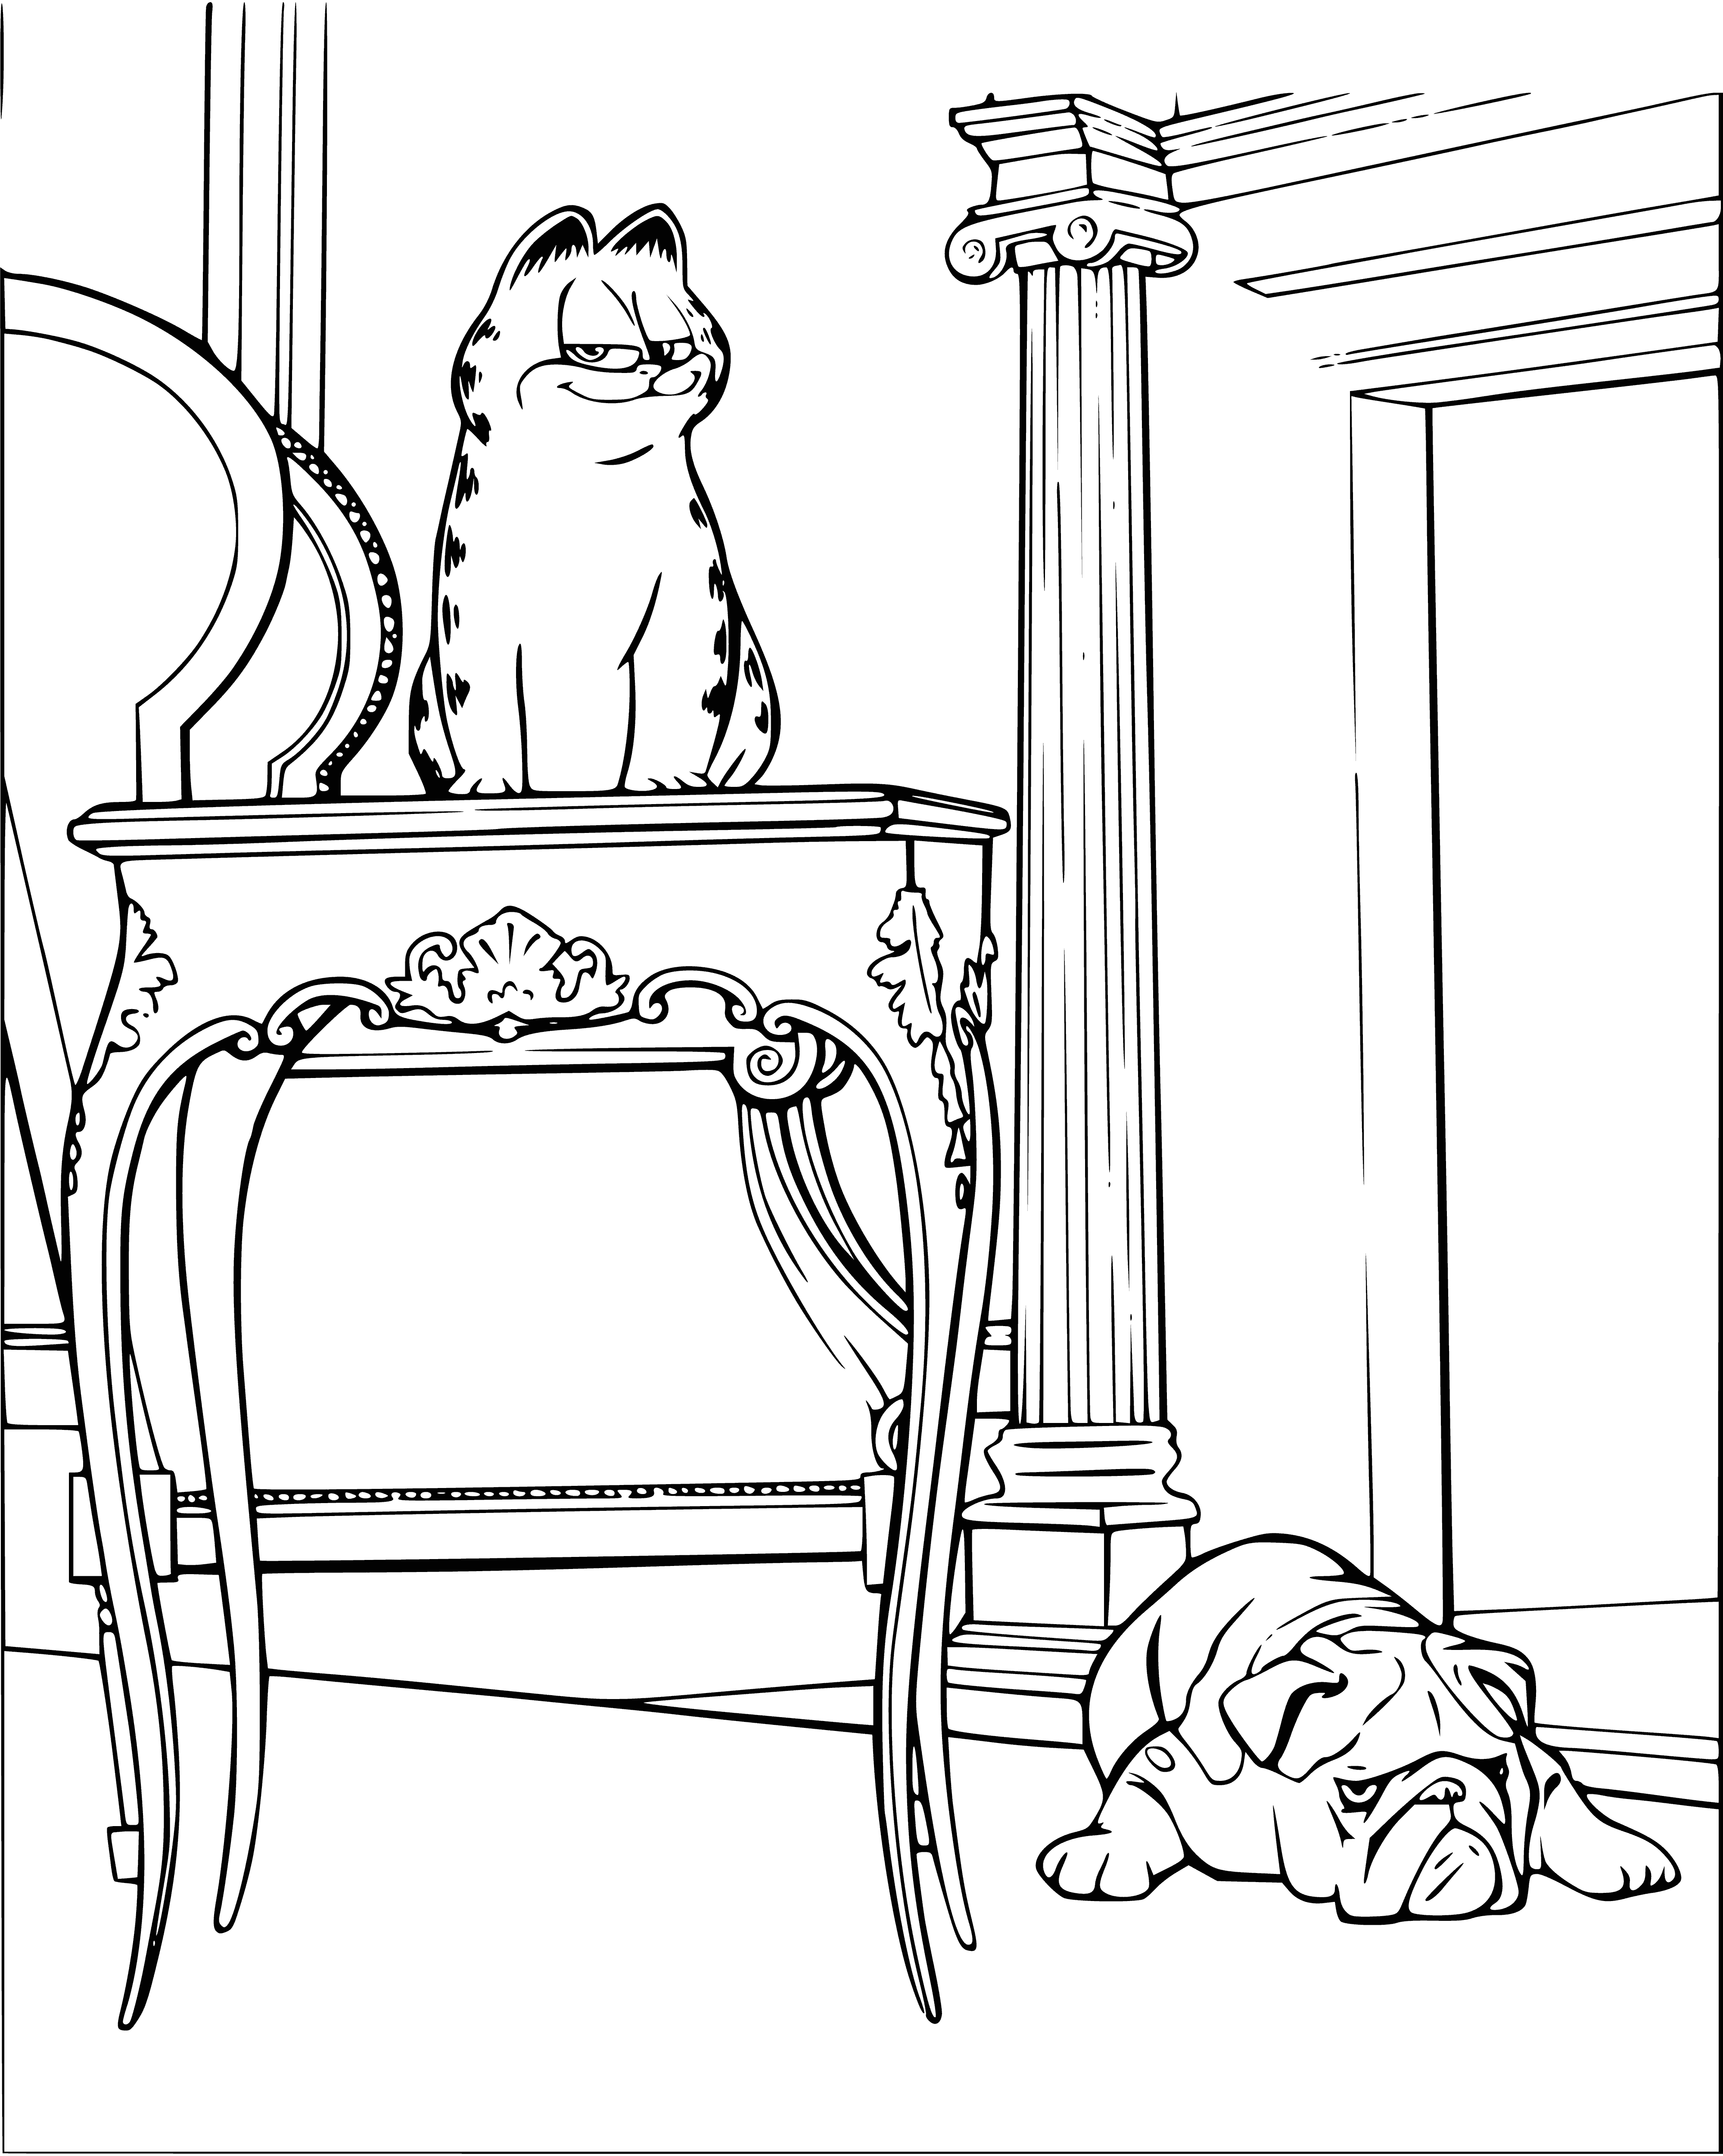 Garfield and the dog coloring page